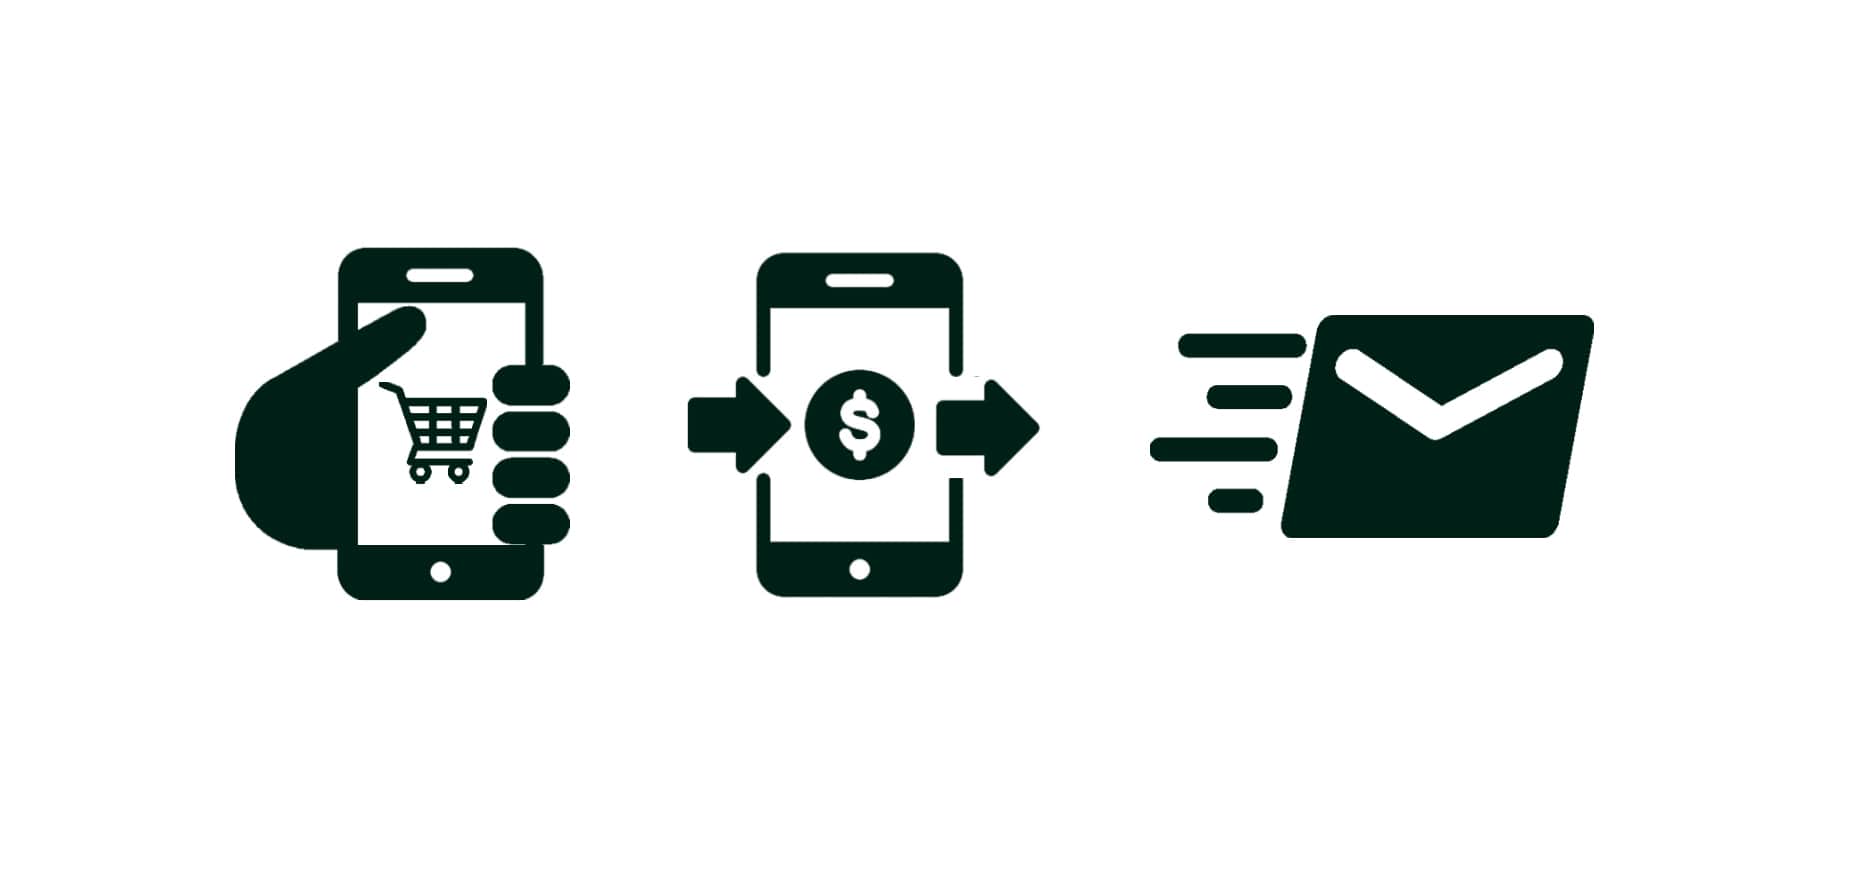 Icons describing a quick purchase with a mobile app